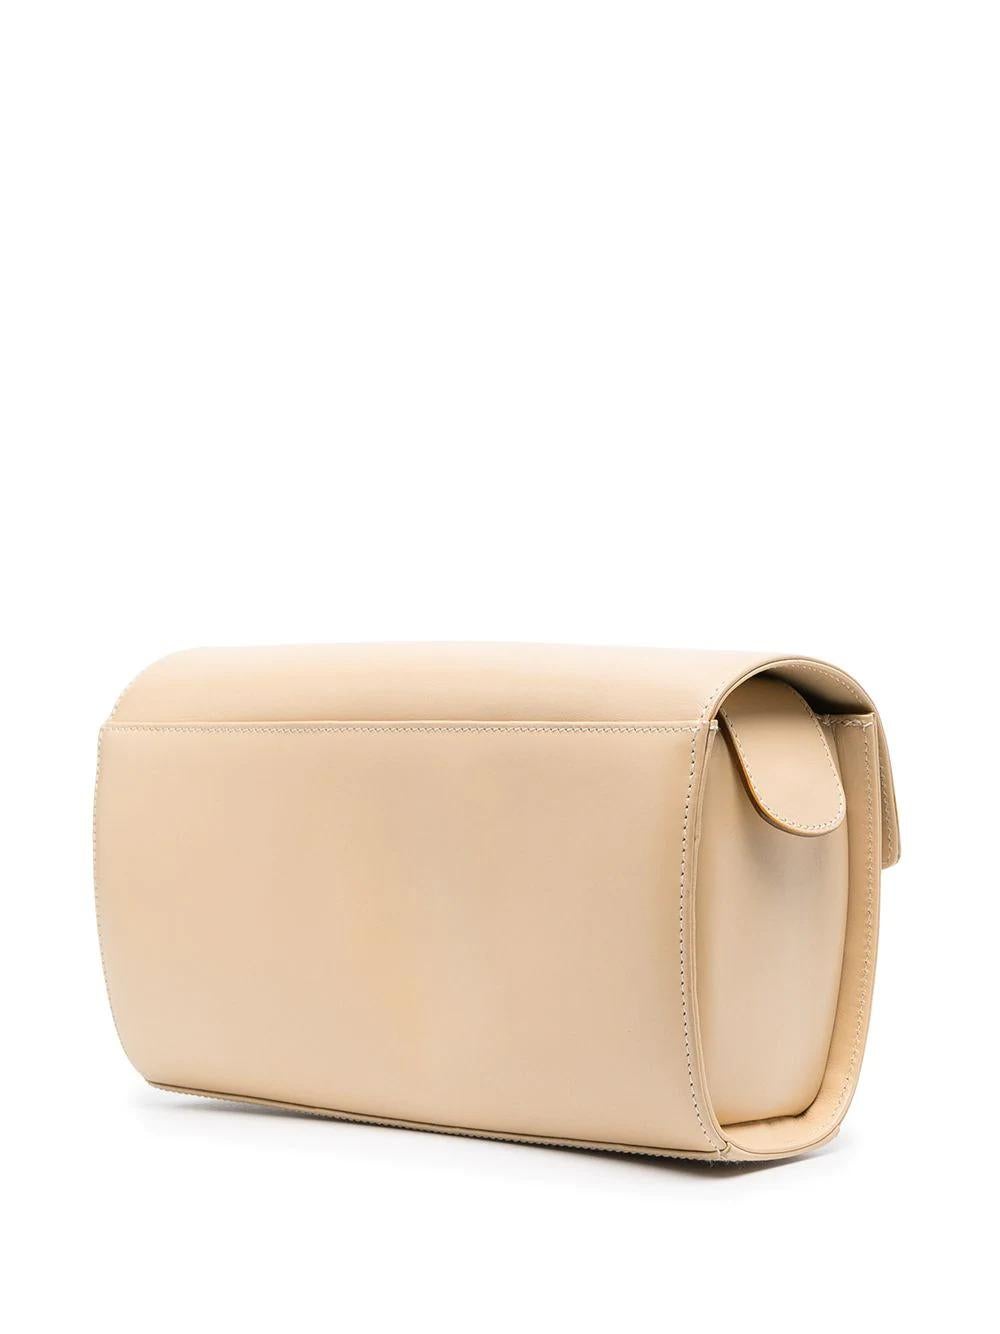 With an unfettered silhouette and an understated beige leather facade, this Ferragamo shoulder bag exudes quiet luxury and Italianate craftsmanship. Featuring Ferragamo-embossed gold-tone buckles, it is a perfect companion piece for evening wear, or